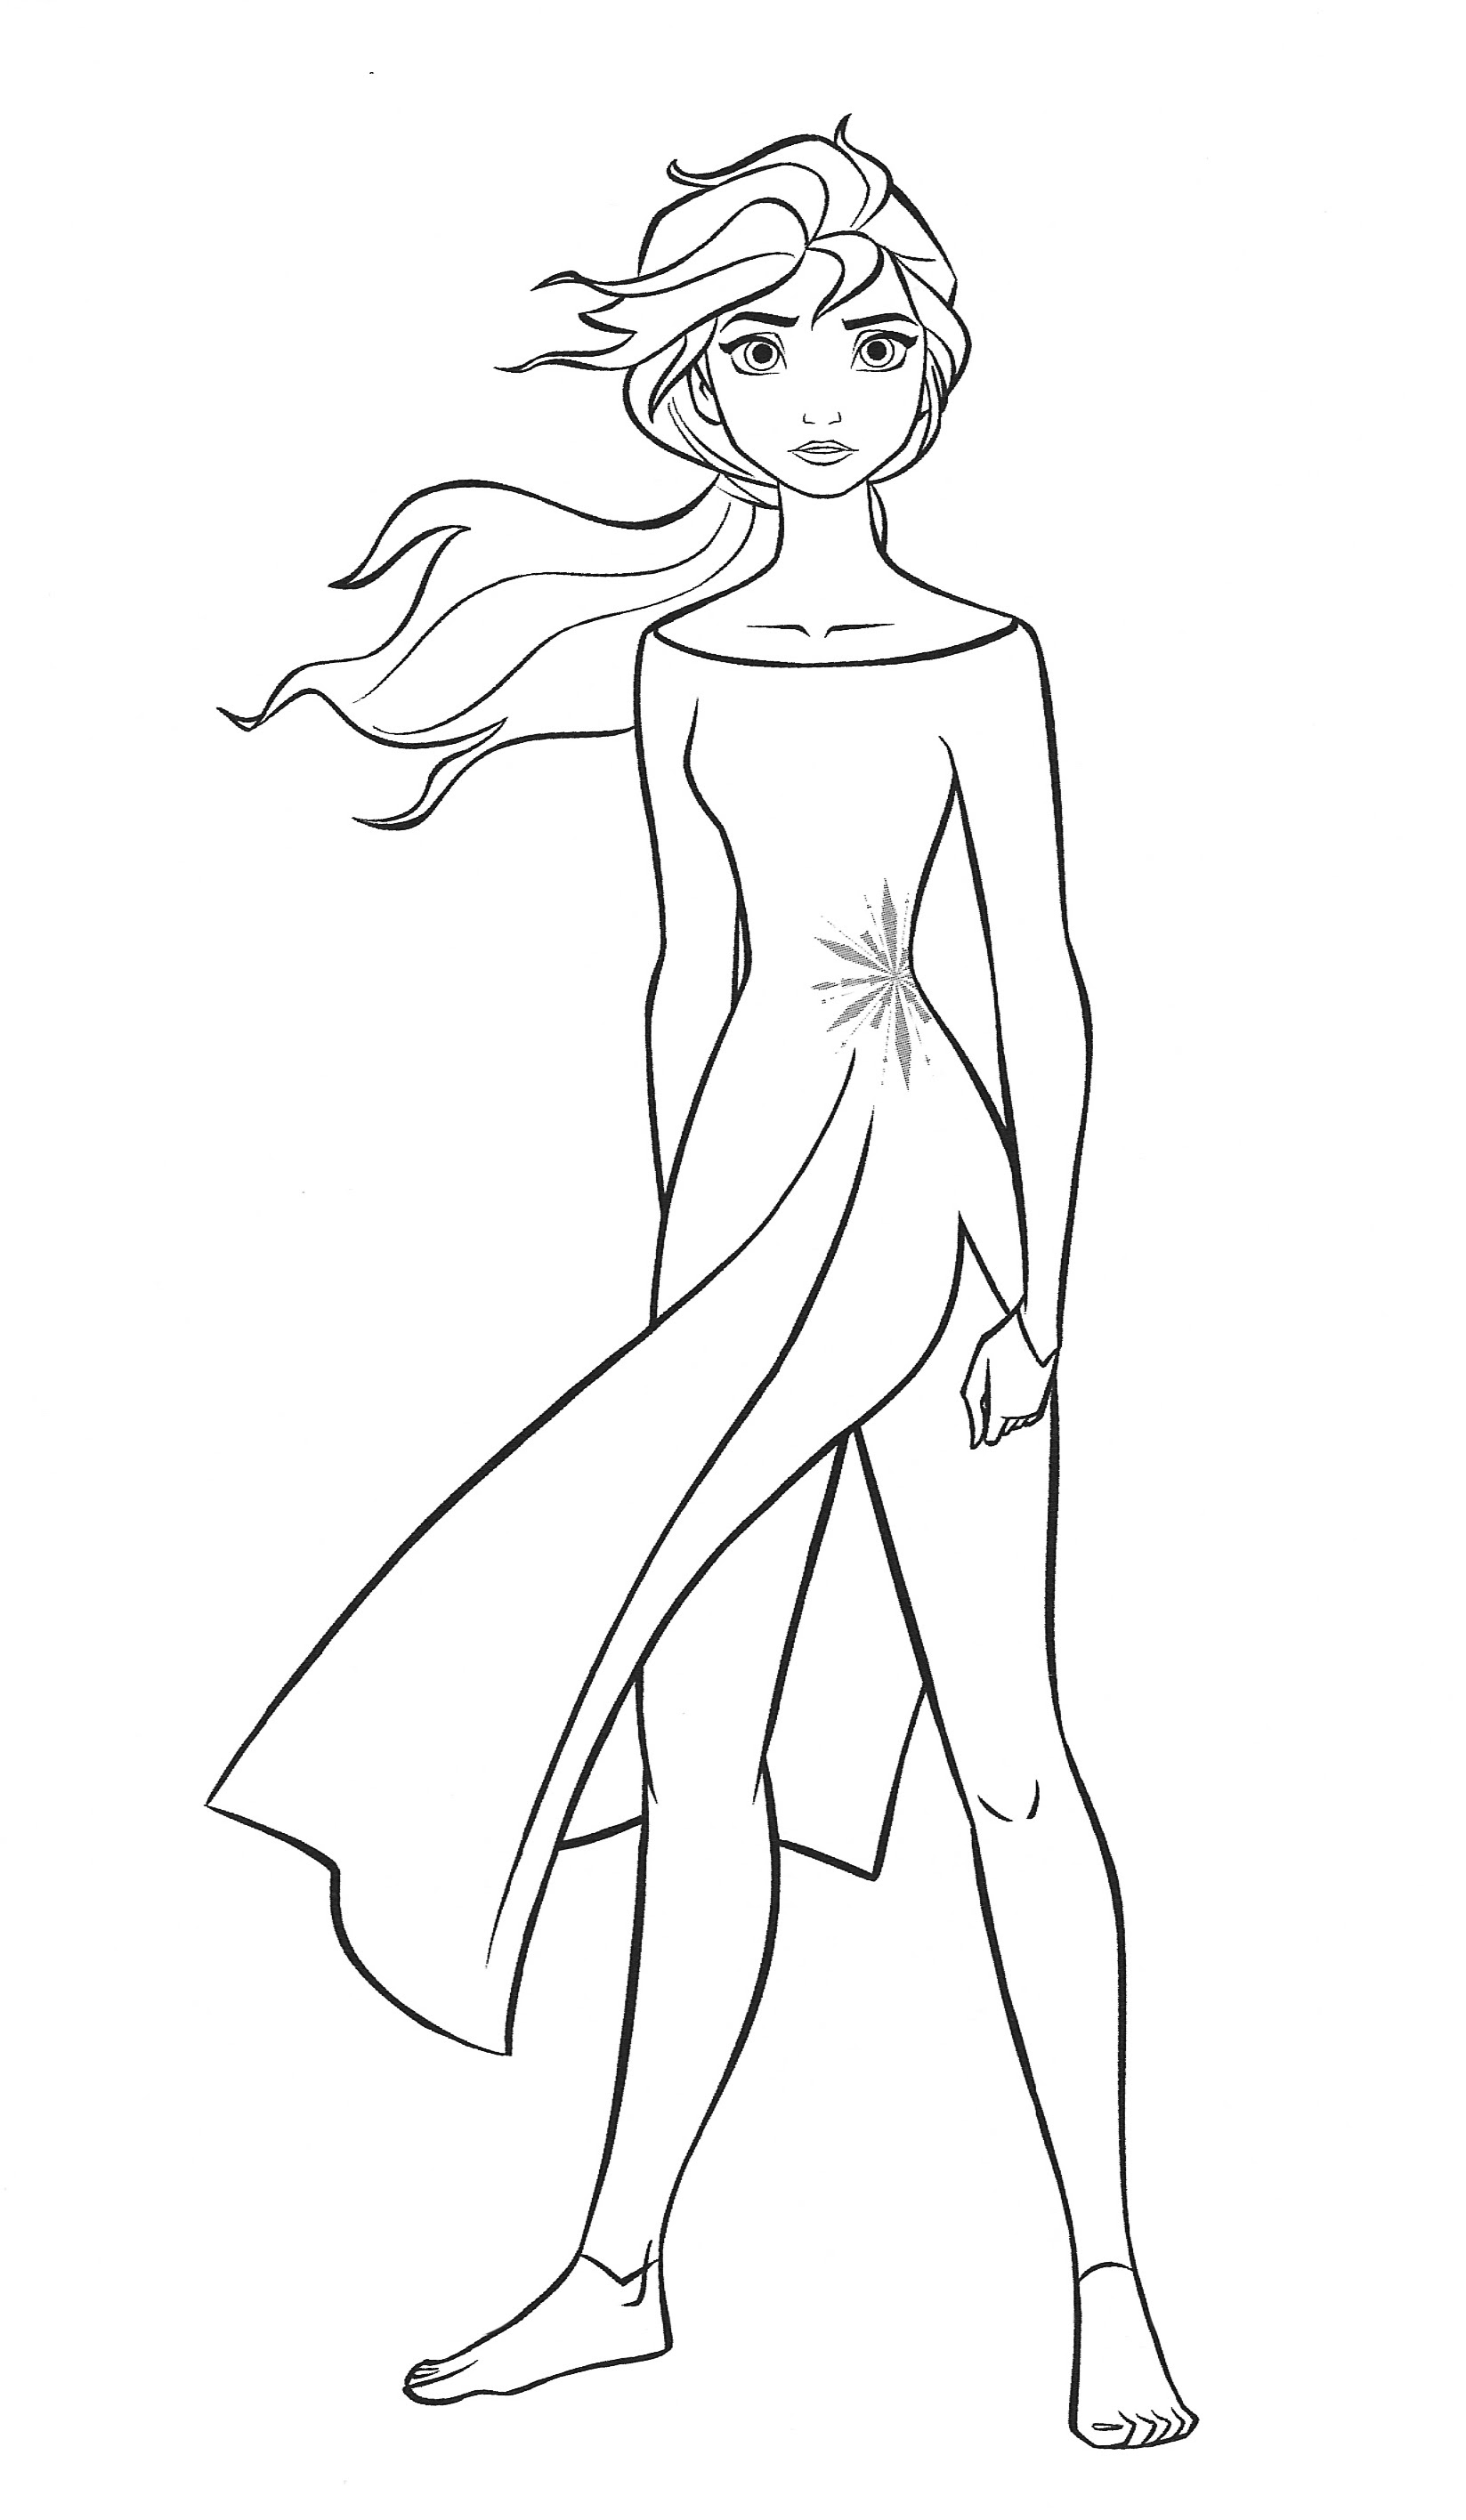 Download Frozen 2 Coloring Pages Into The Unknown - colouring mermaid